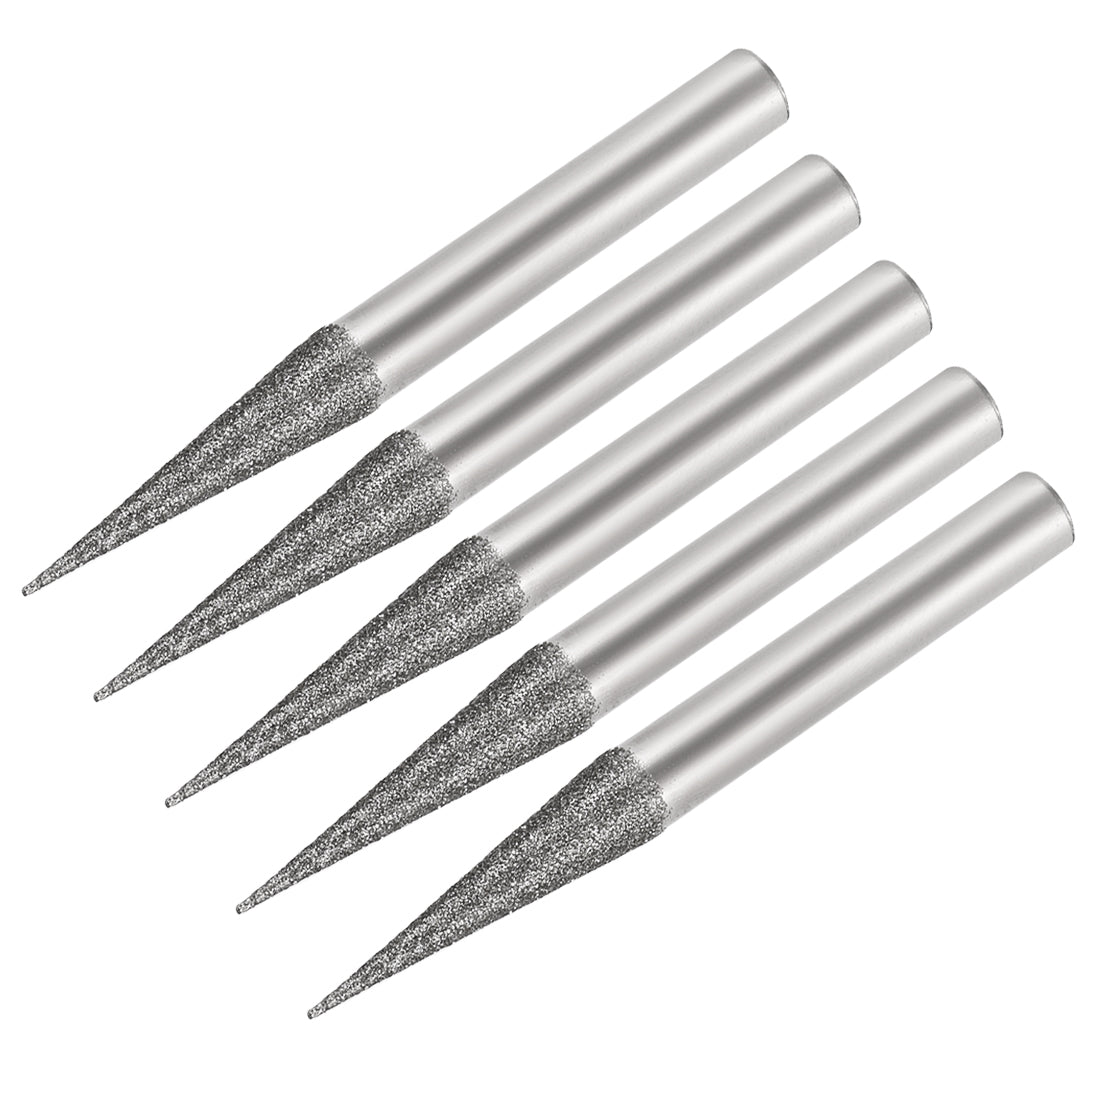 uxcell Uxcell Diamond Burrs Grinding Drill Bits for Carving Rotary Tool 1/4-Inch Shank 6mm Pointed 150 Grit 5 Pcs